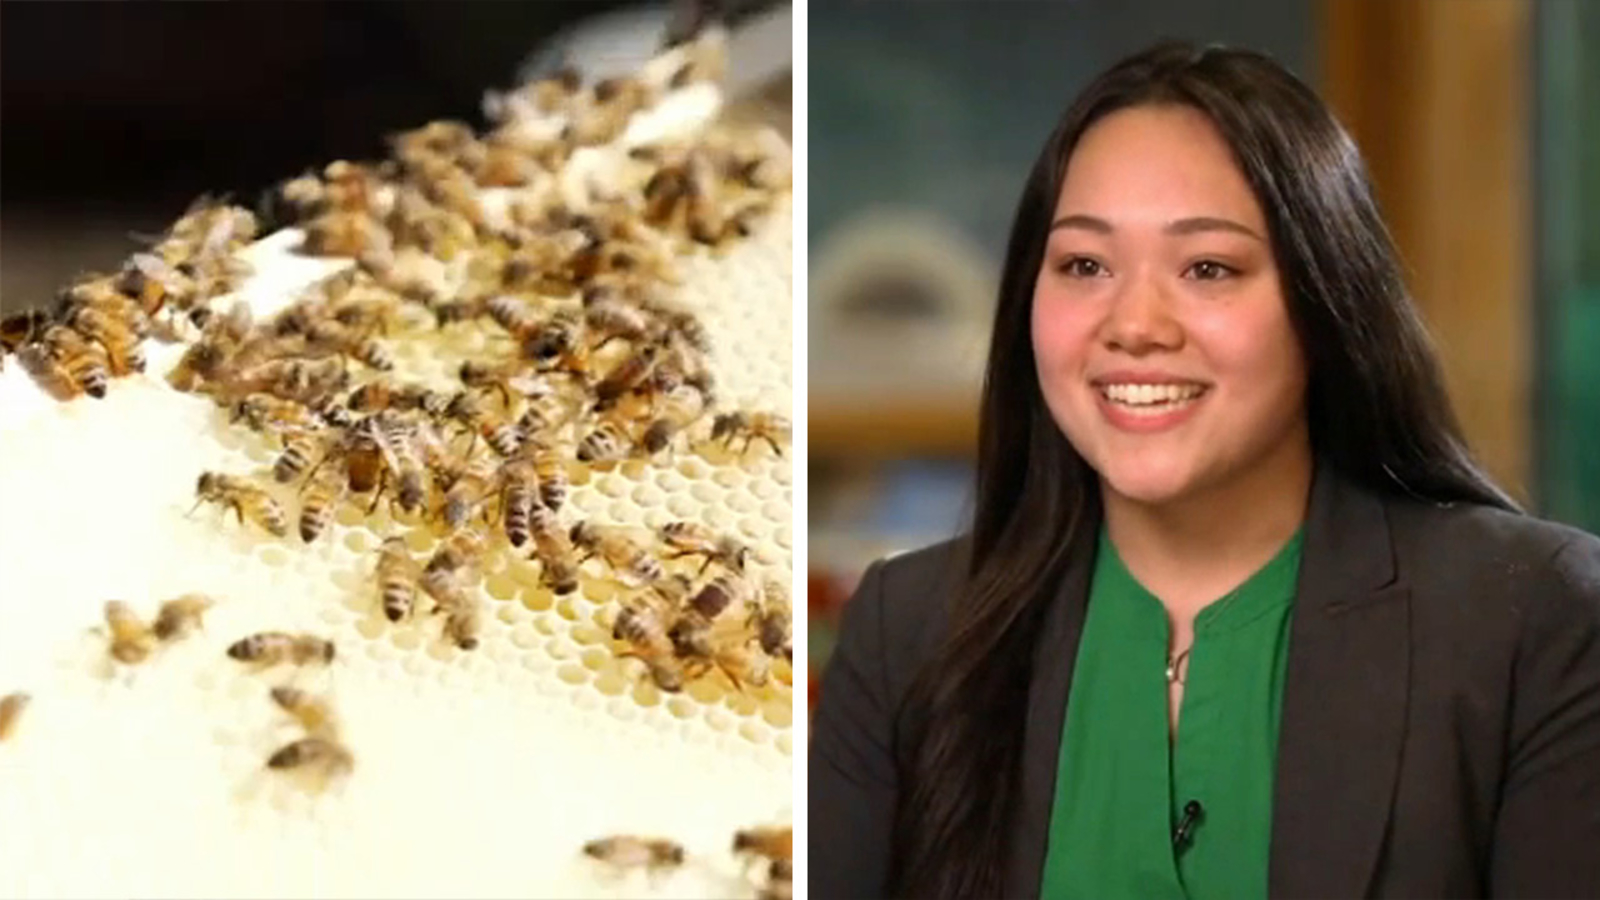 Protecting bees: NJ high school student Katie Culbert named ‘honey queen’ for developing way to save pollinators from pests [Video]